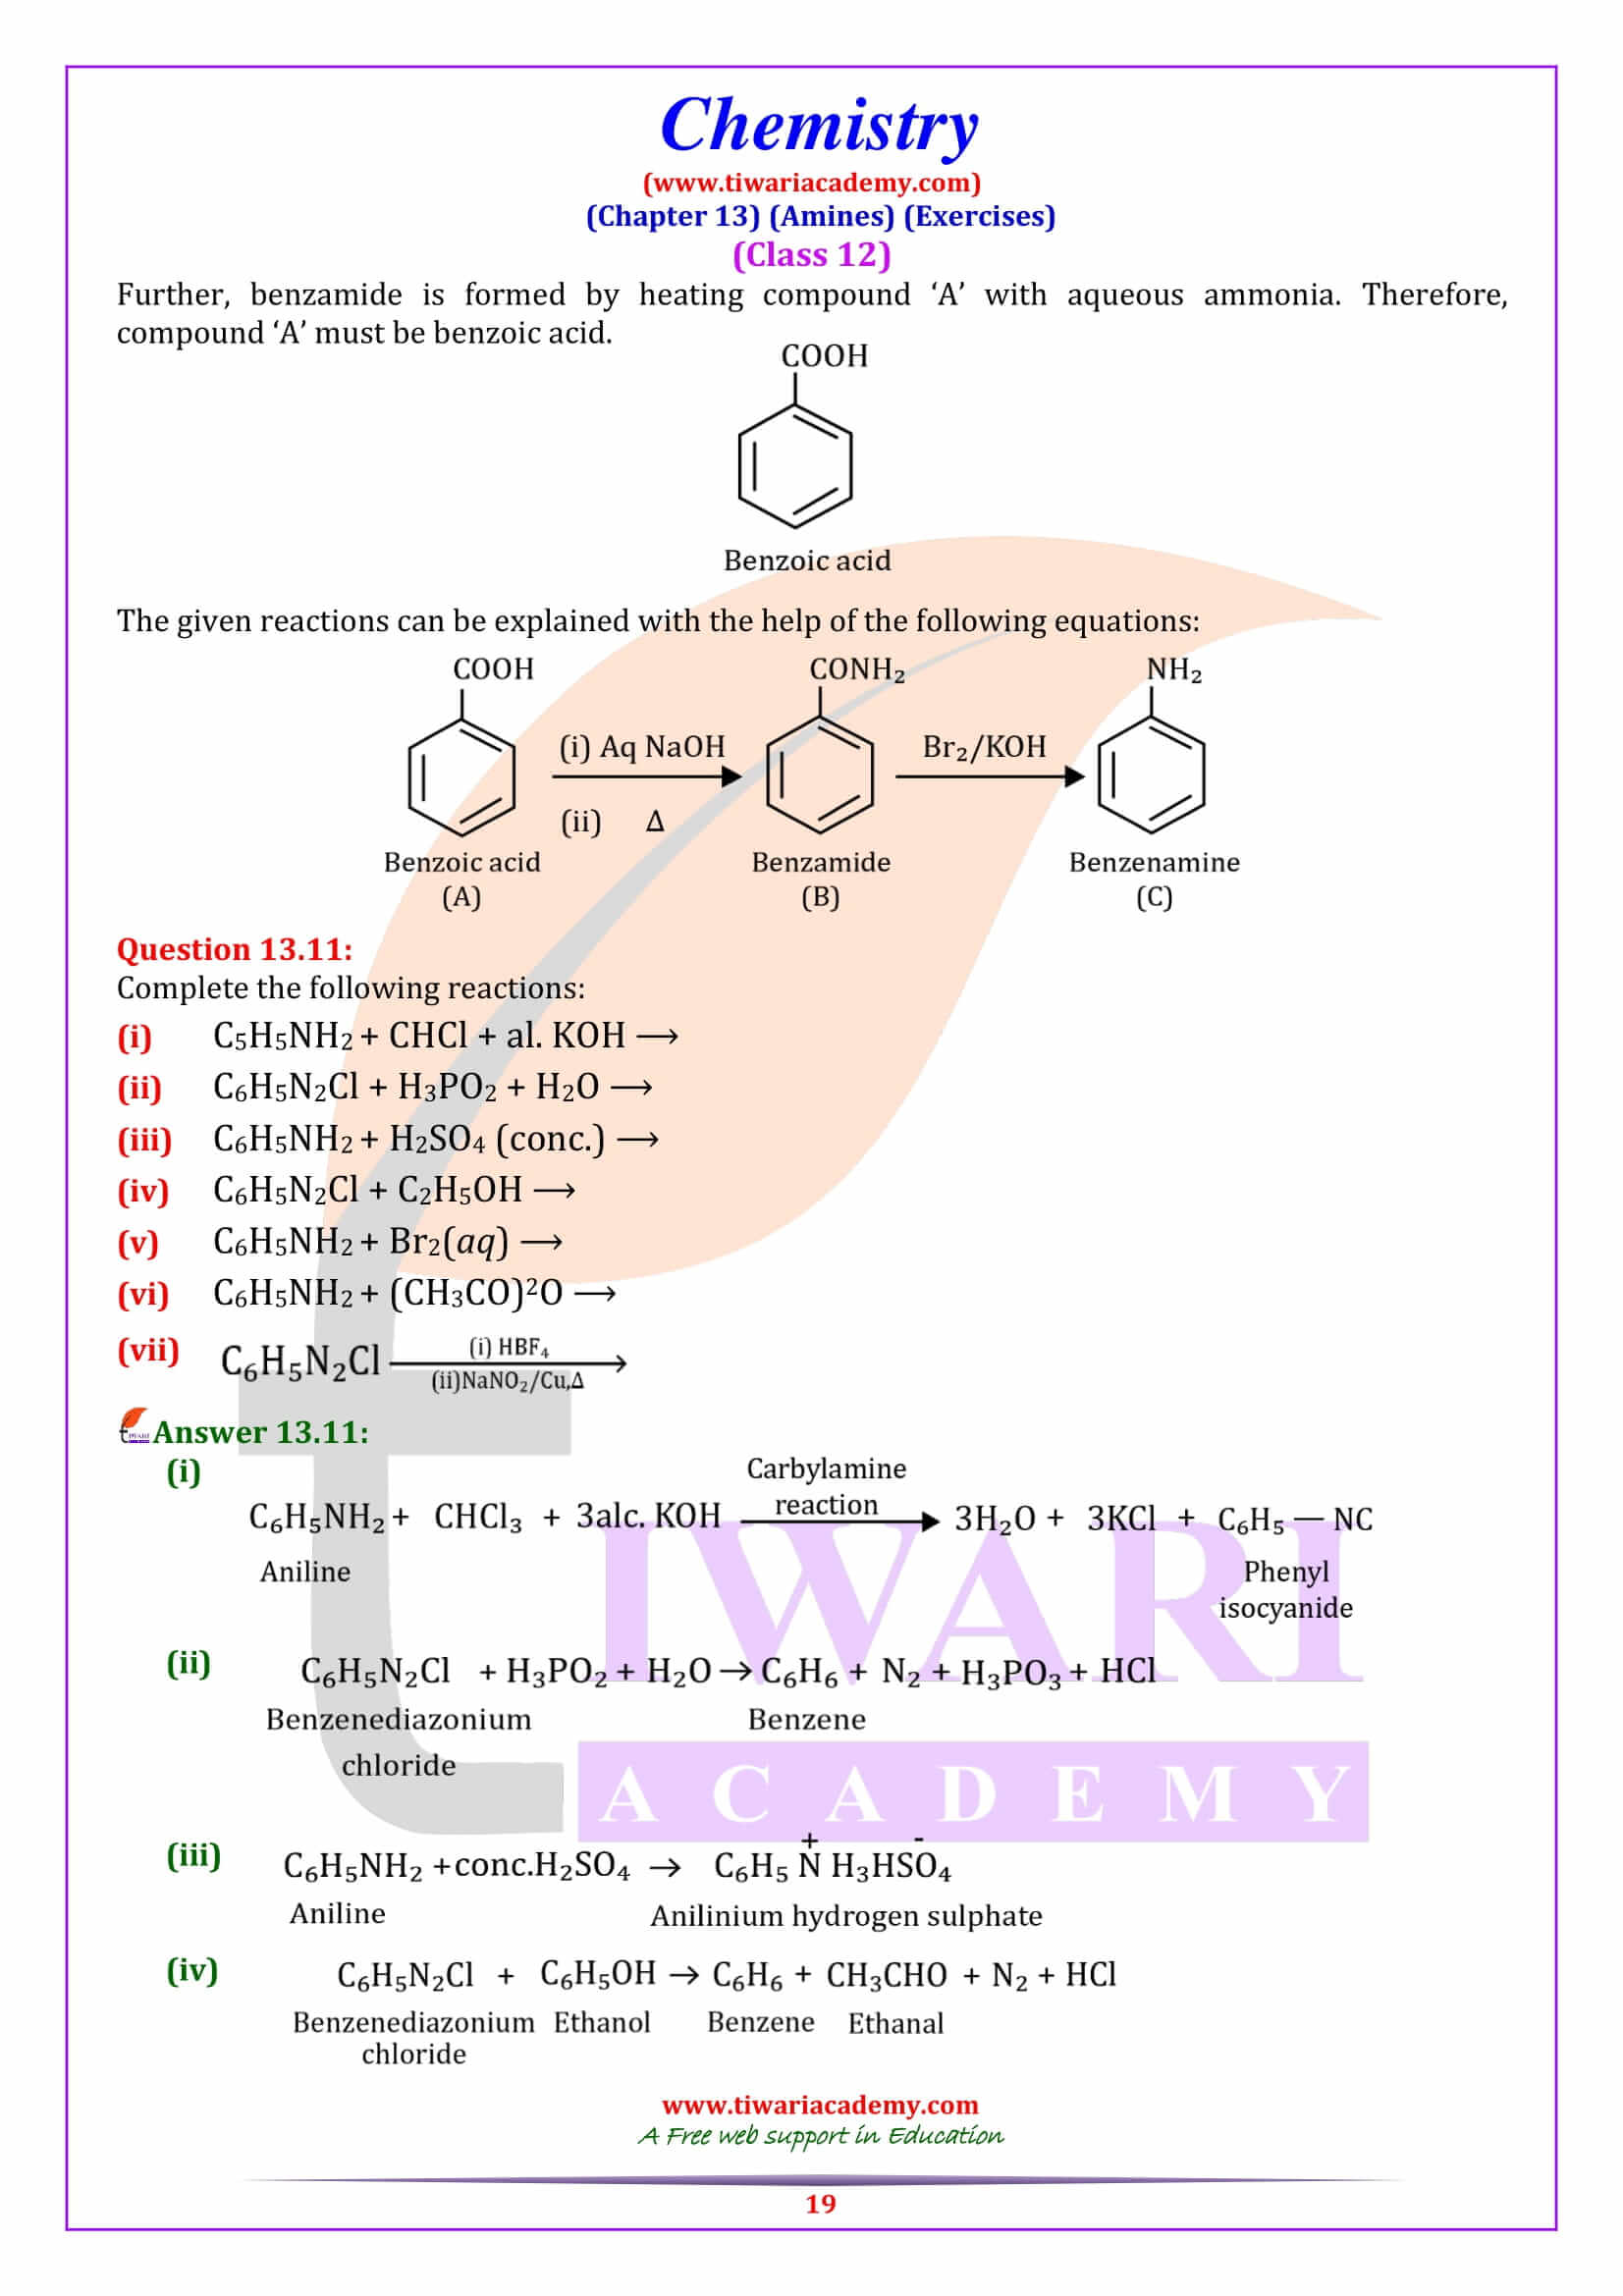 Class 12 Chemistry Chapter 13 Questions and answers